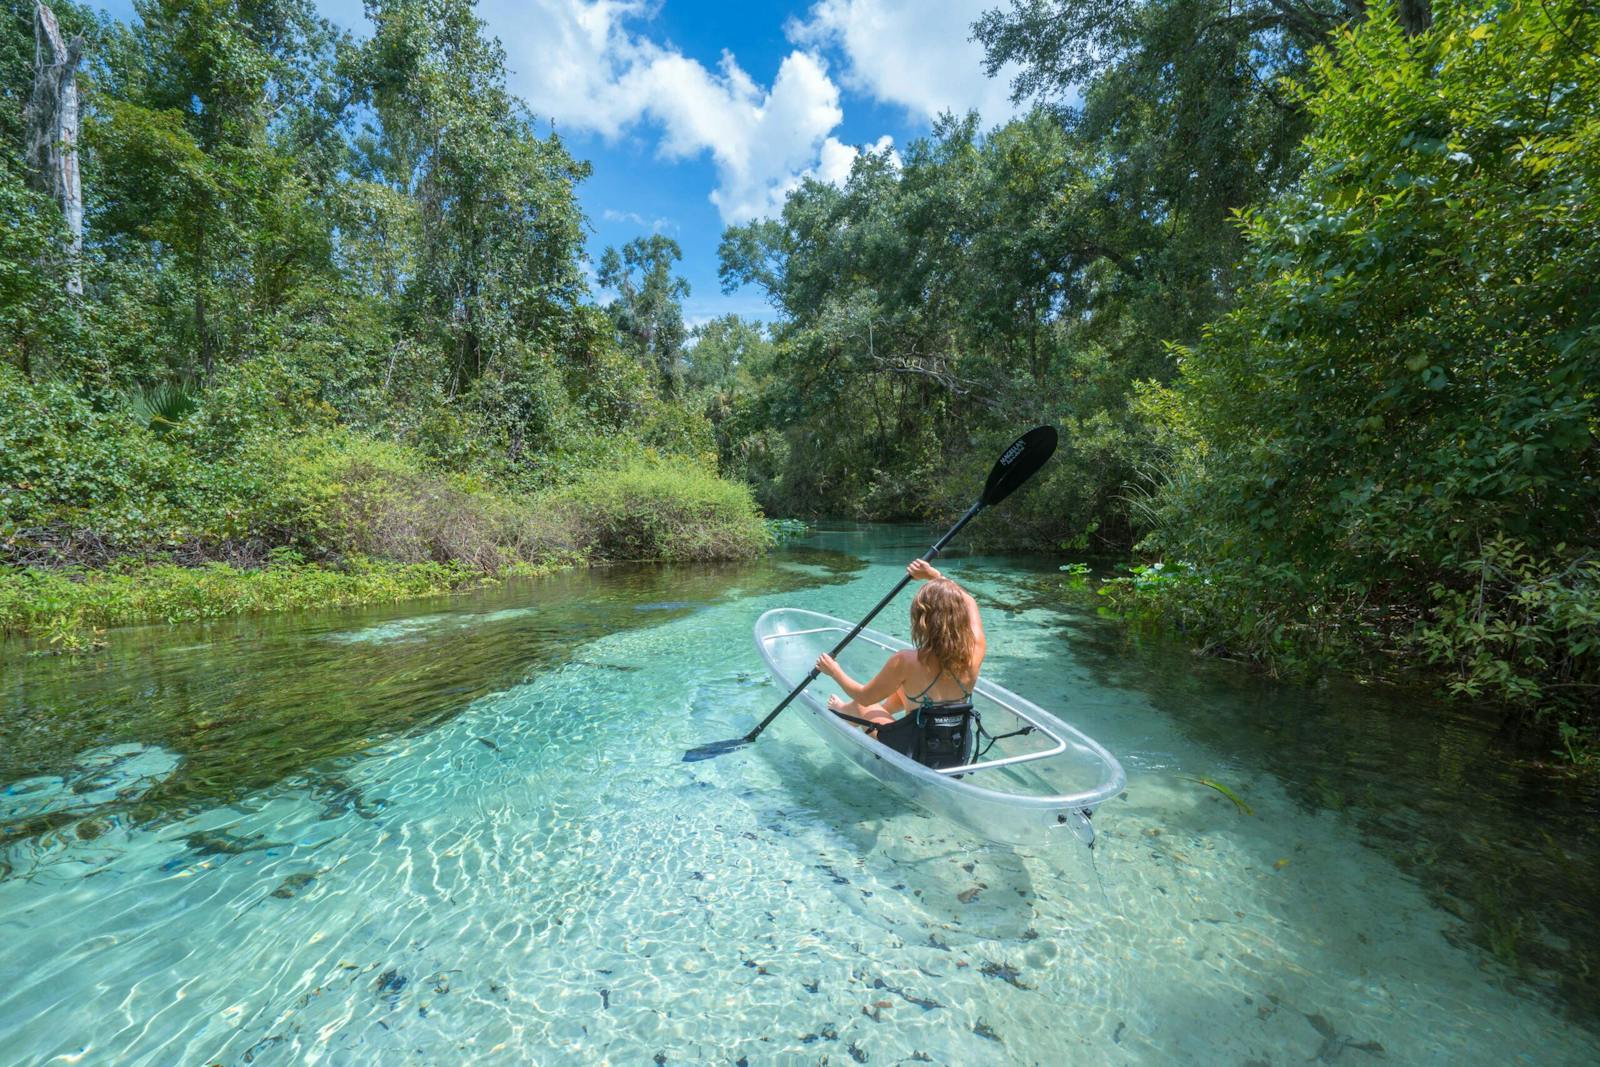 a woman riding on a clear kayak boat in the water